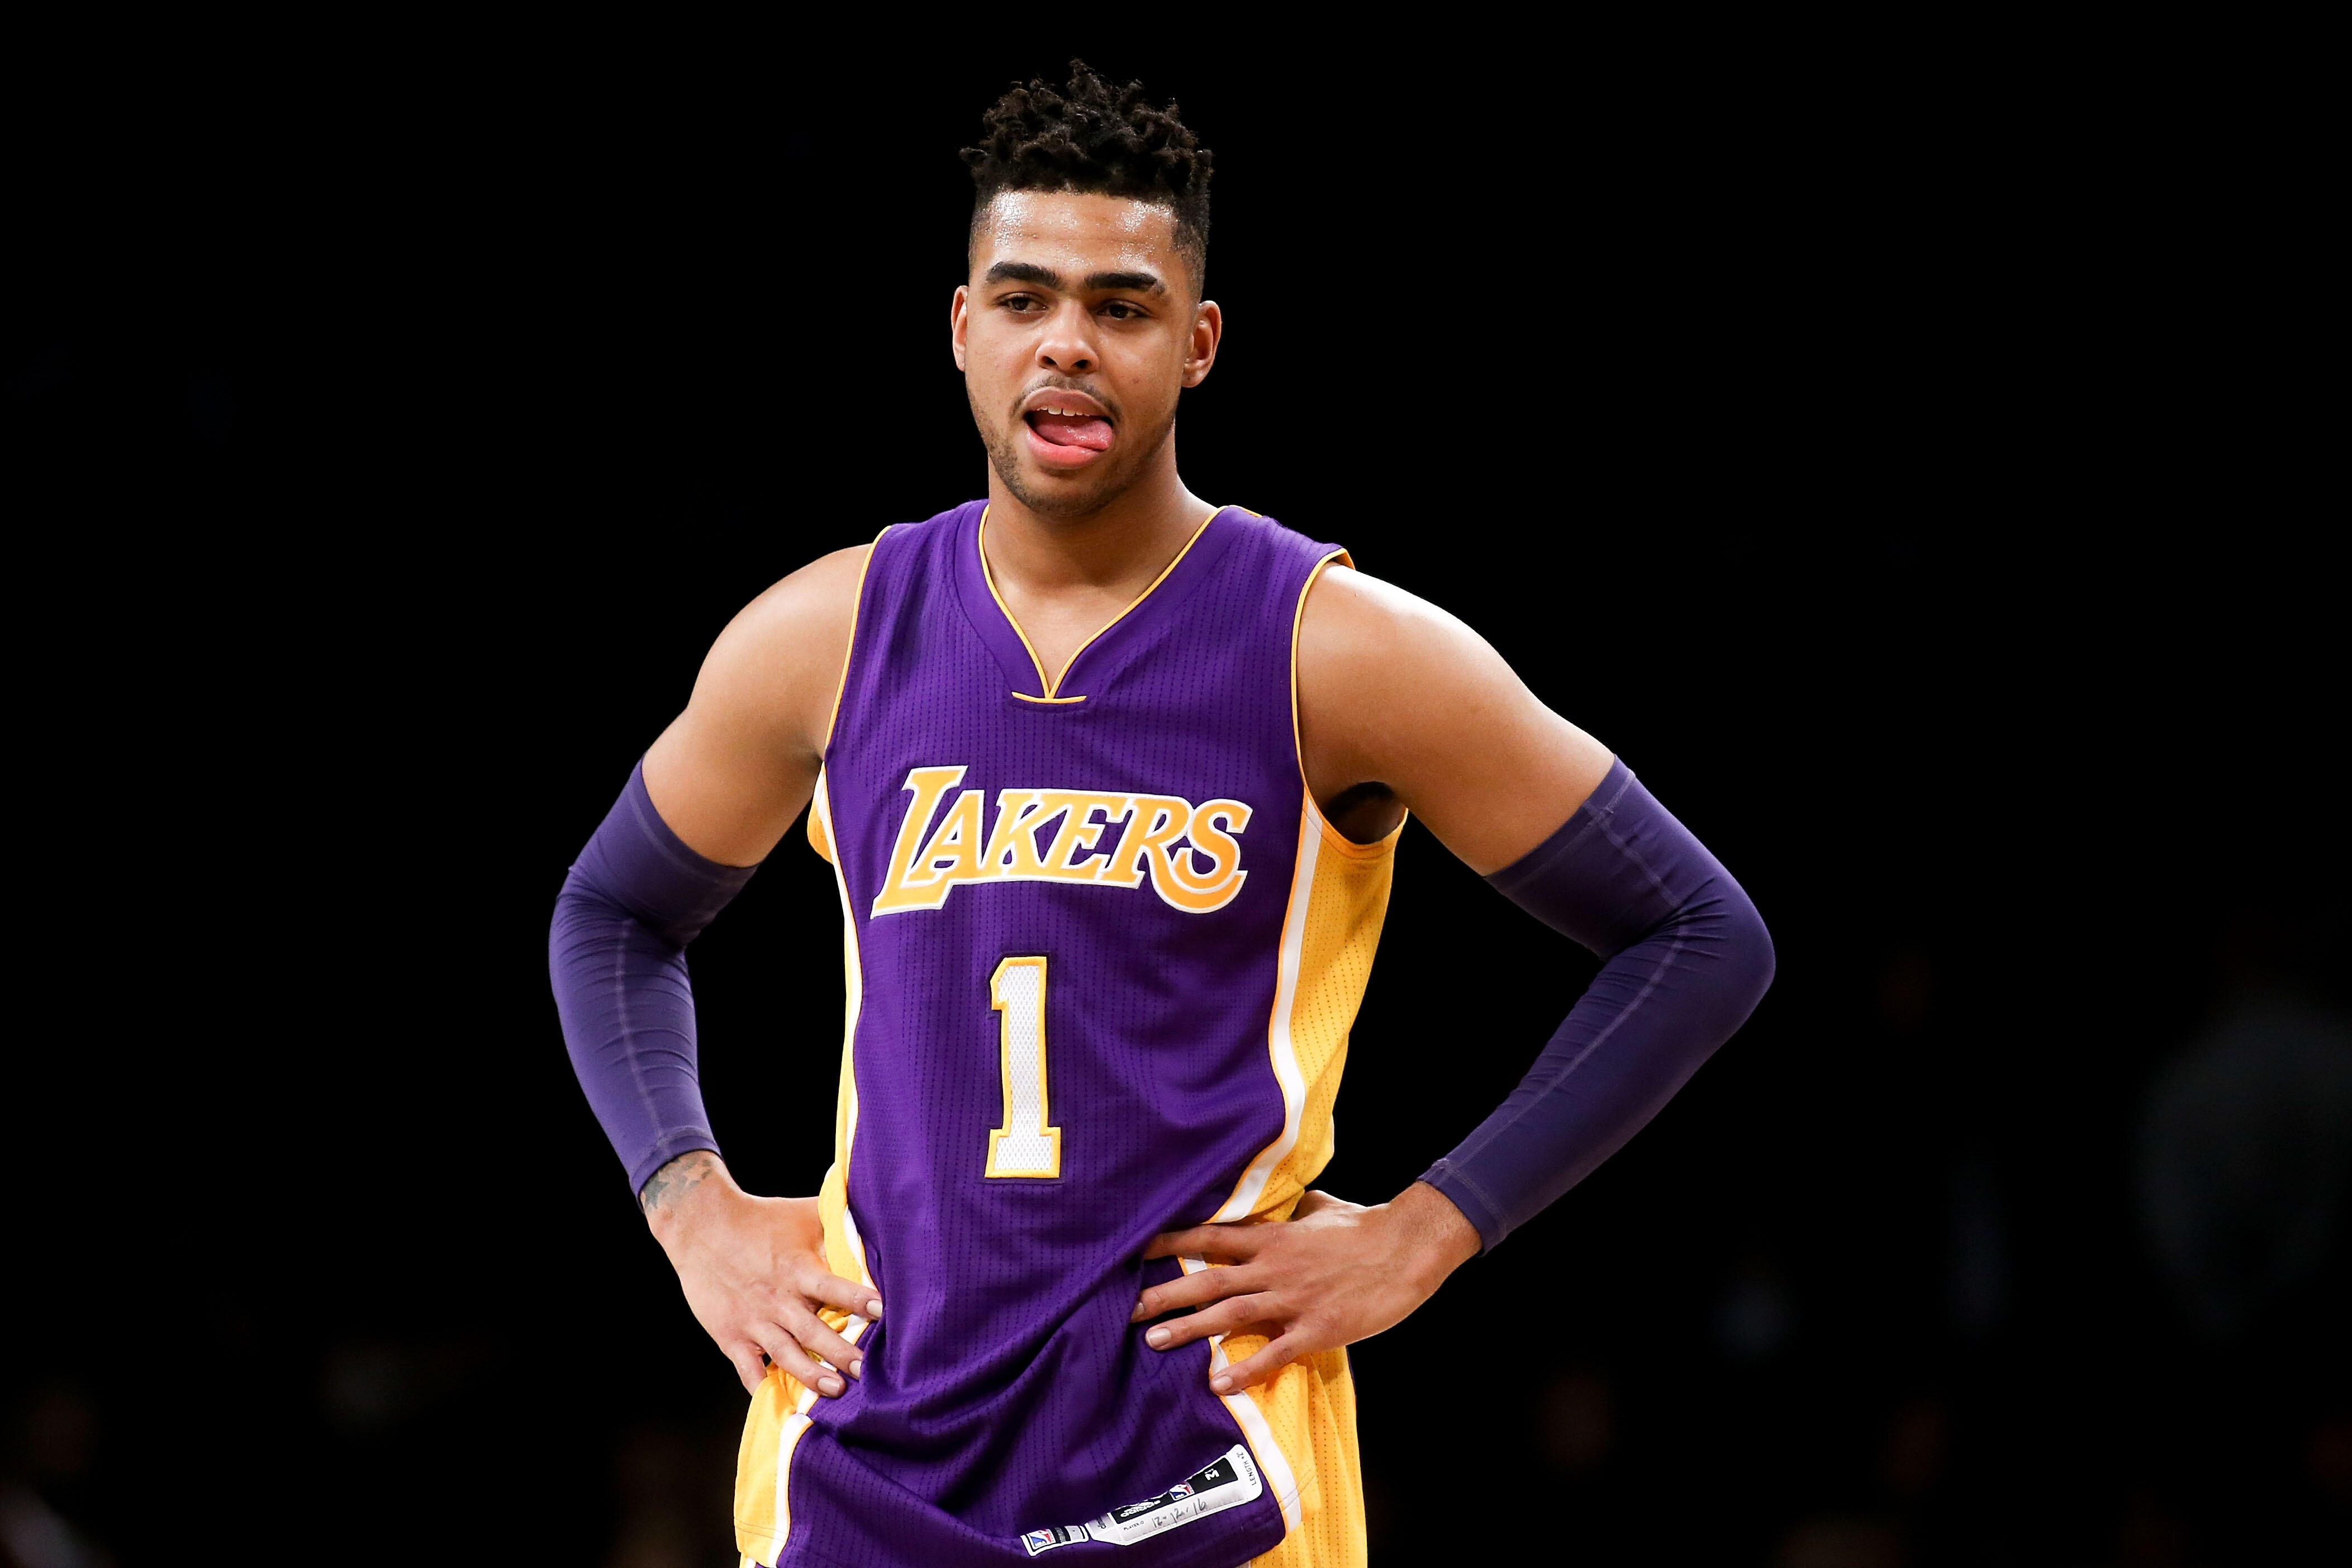 NEW YORK, NY - DECEMBER 14:  D'Angelo Russell #1 of the Los Angeles Lakers looks on against the Brooklyn Nets in the second half at Barclays Center on December 14, 2016 in the Brooklyn borough of New York City. NOTE TO USER: User expressly acknowledges an